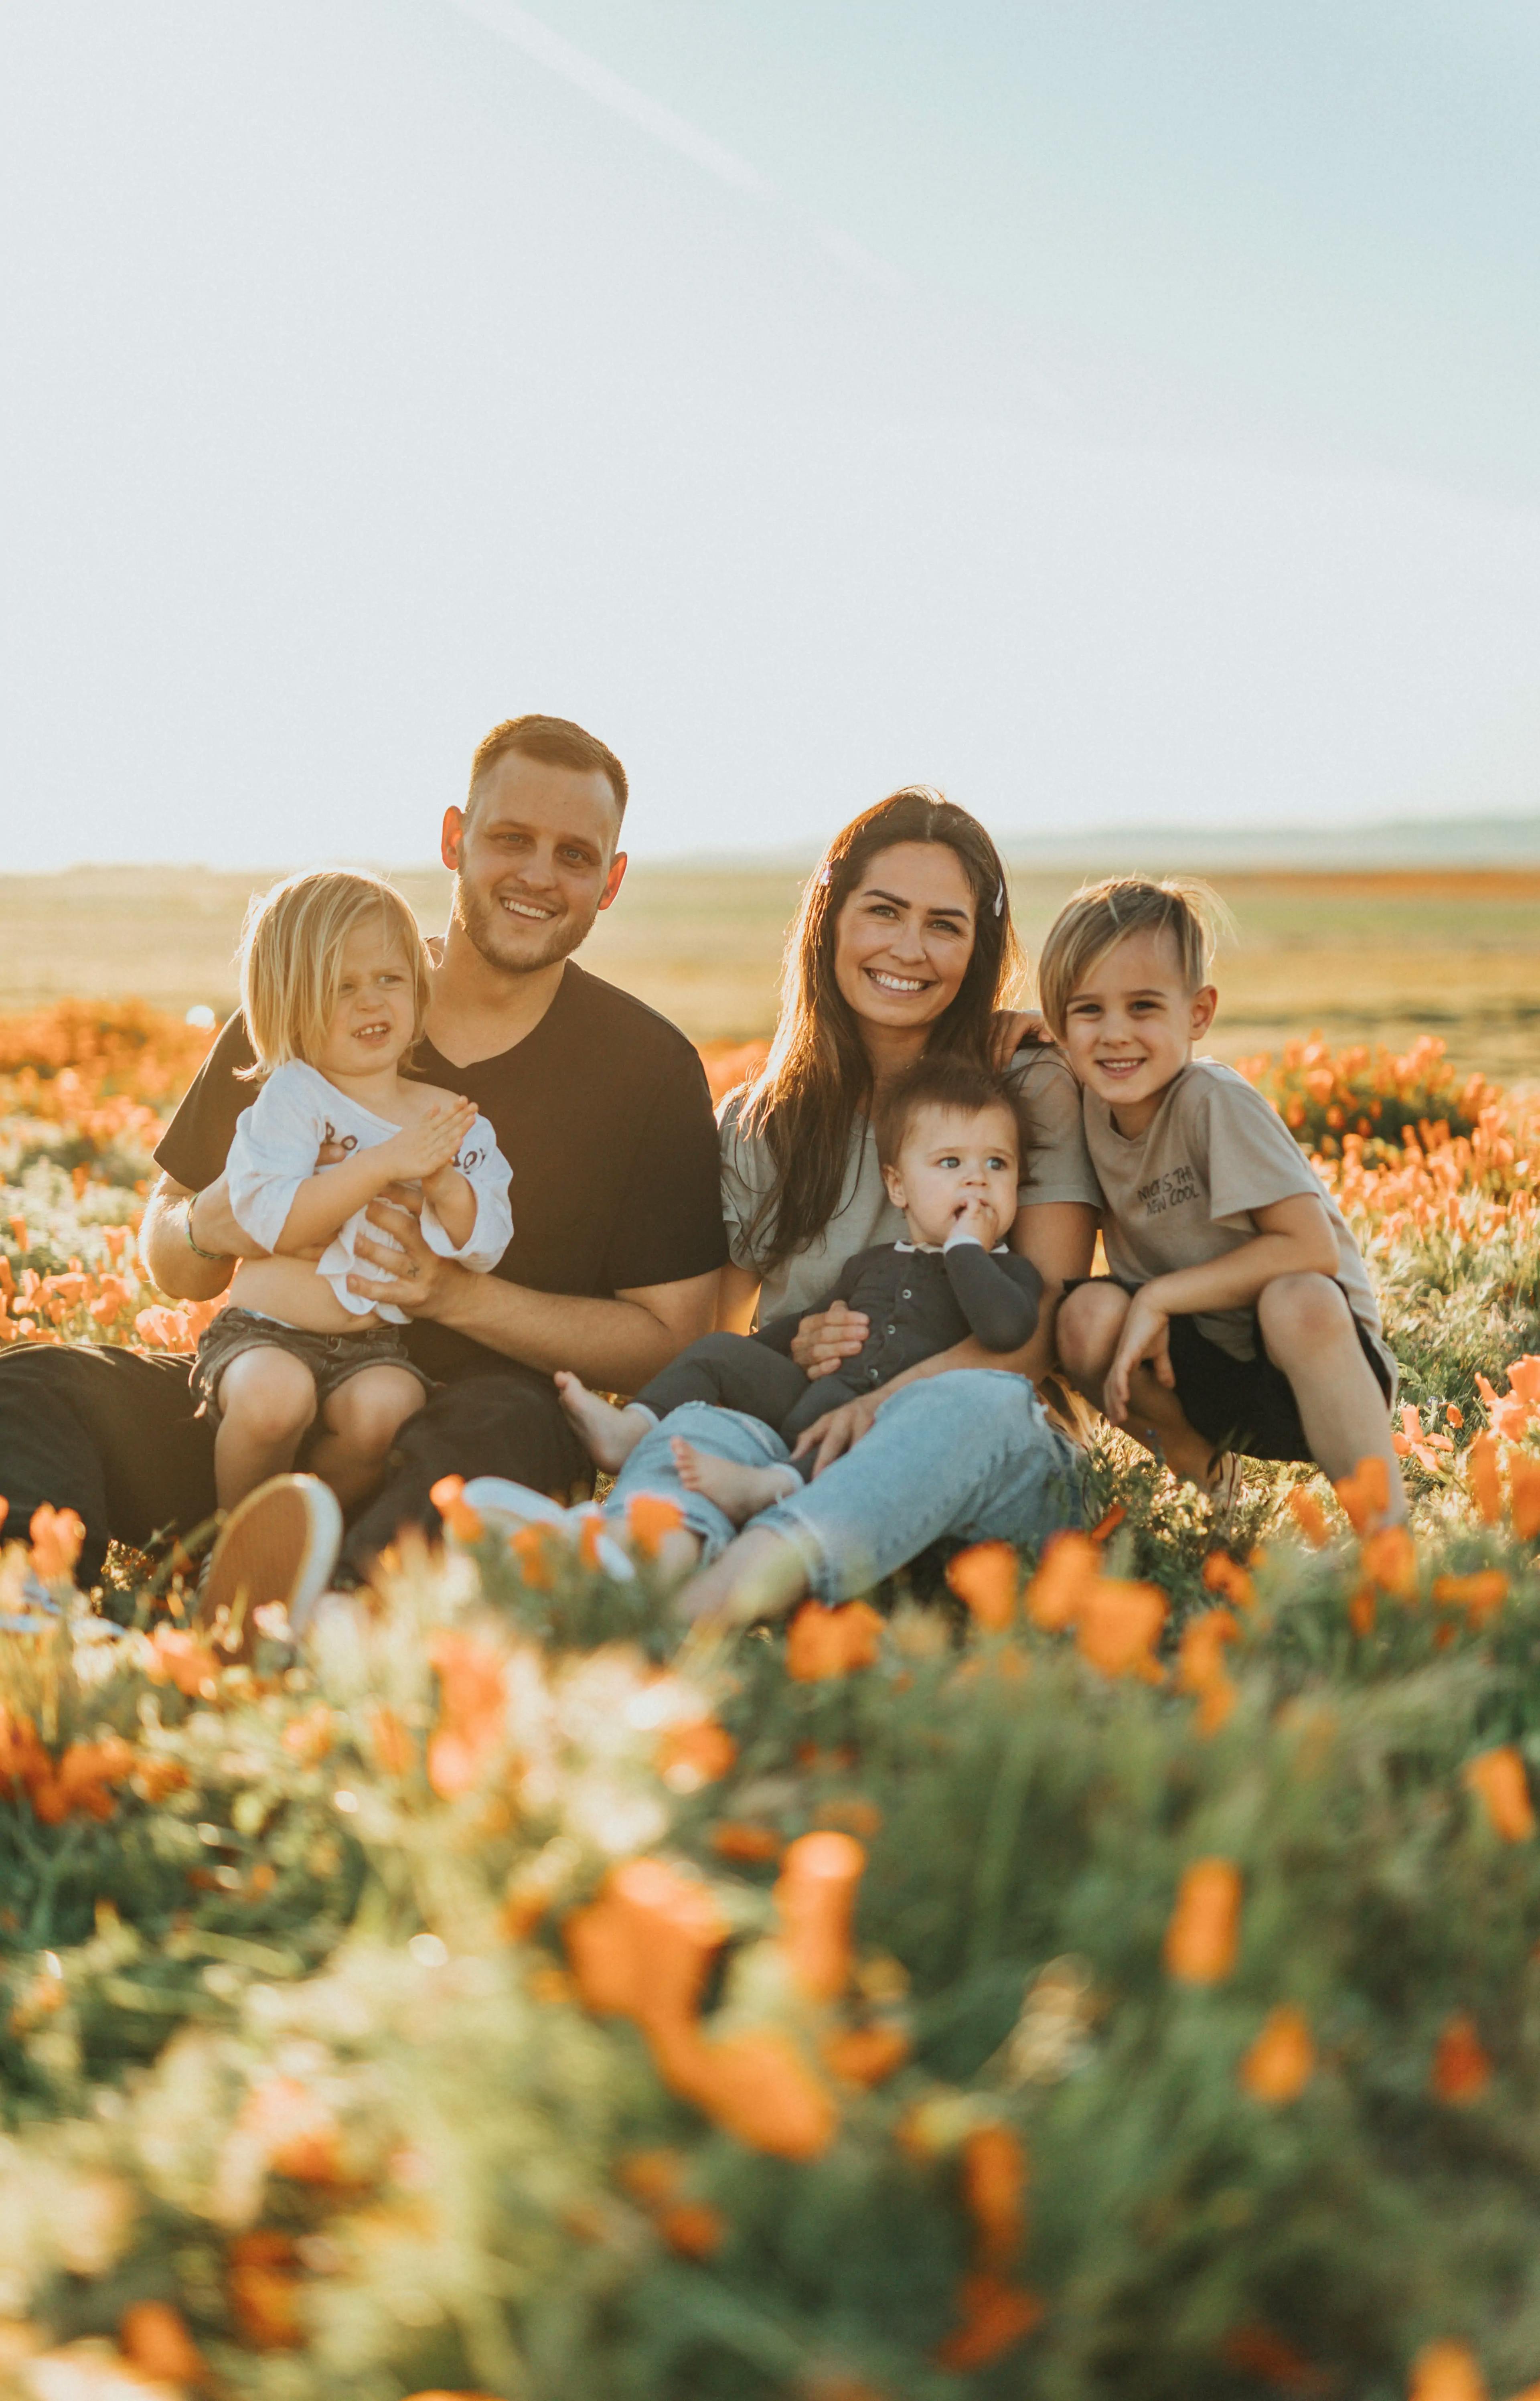 Caucasian mother and father with a son, daughter, and infant son, sitting in a field of orange tulips.